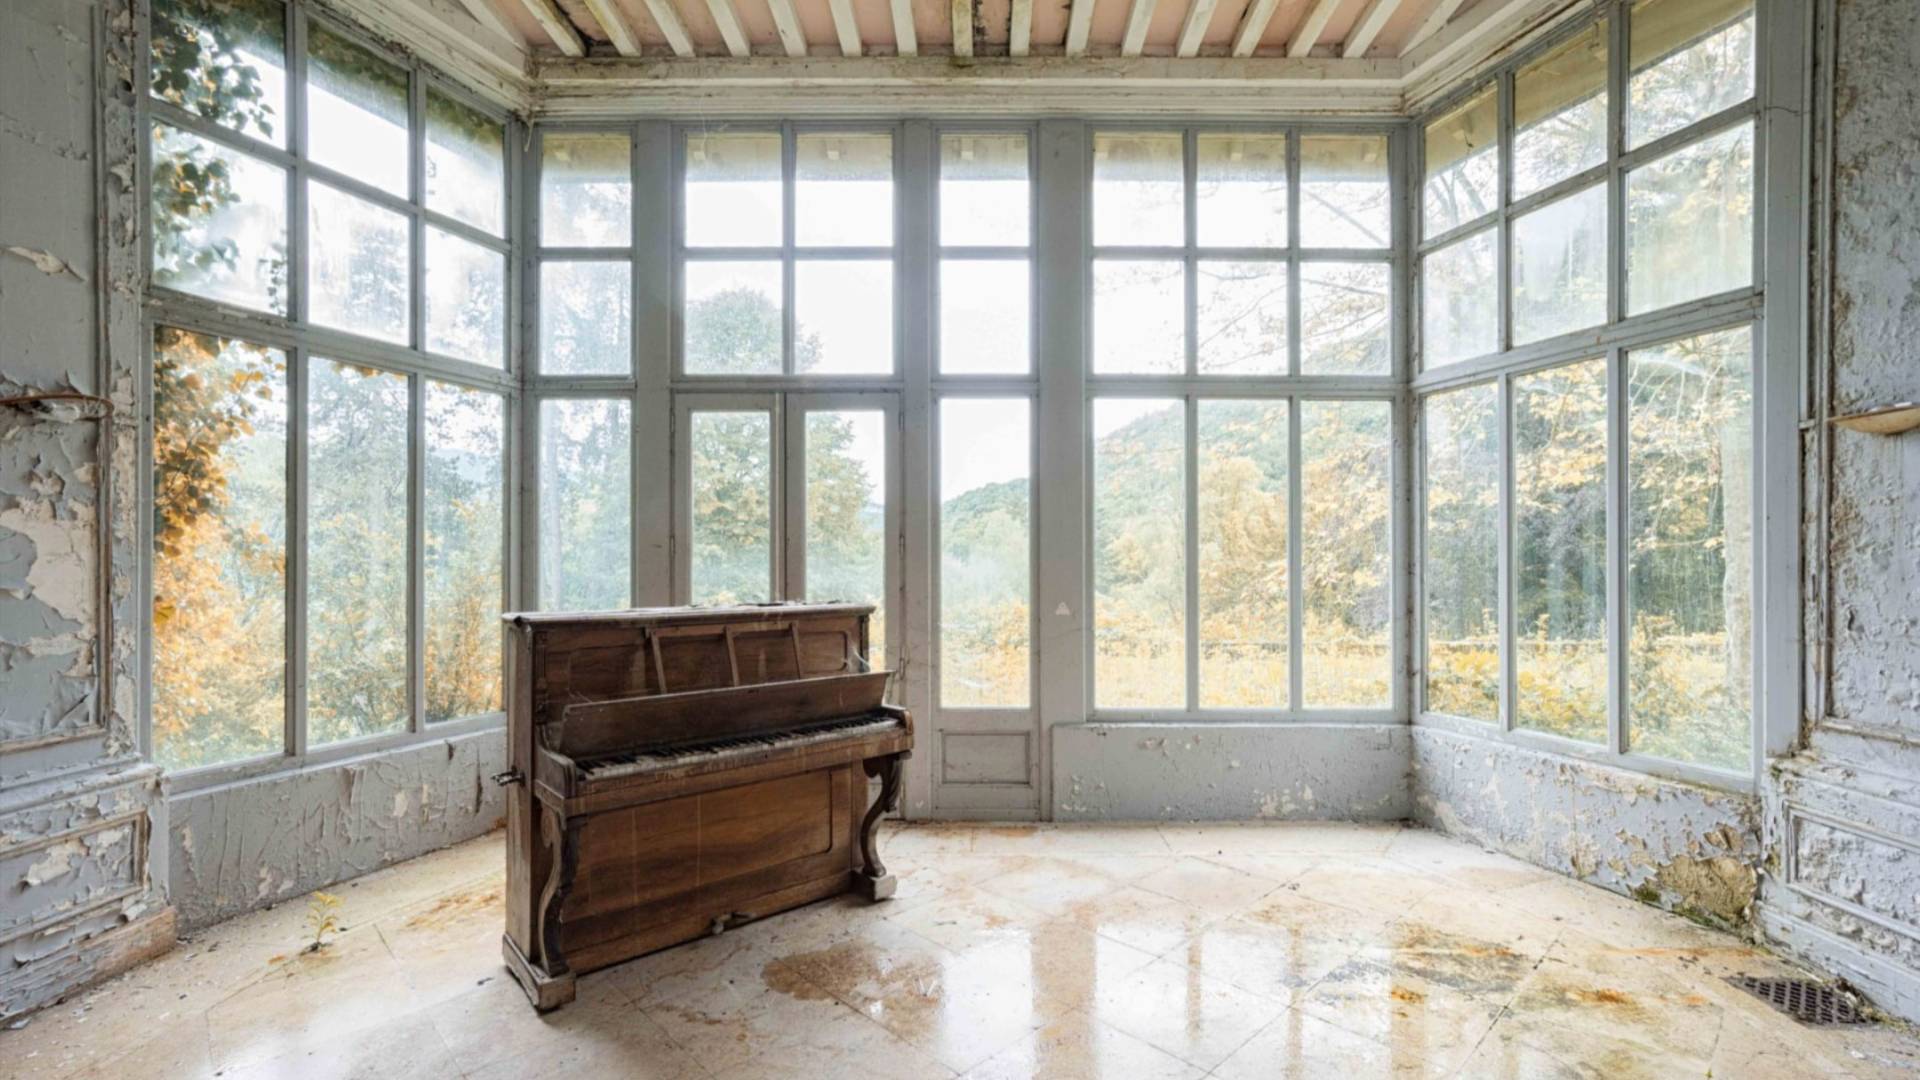 Piano sits in abandoned room in front of windows.